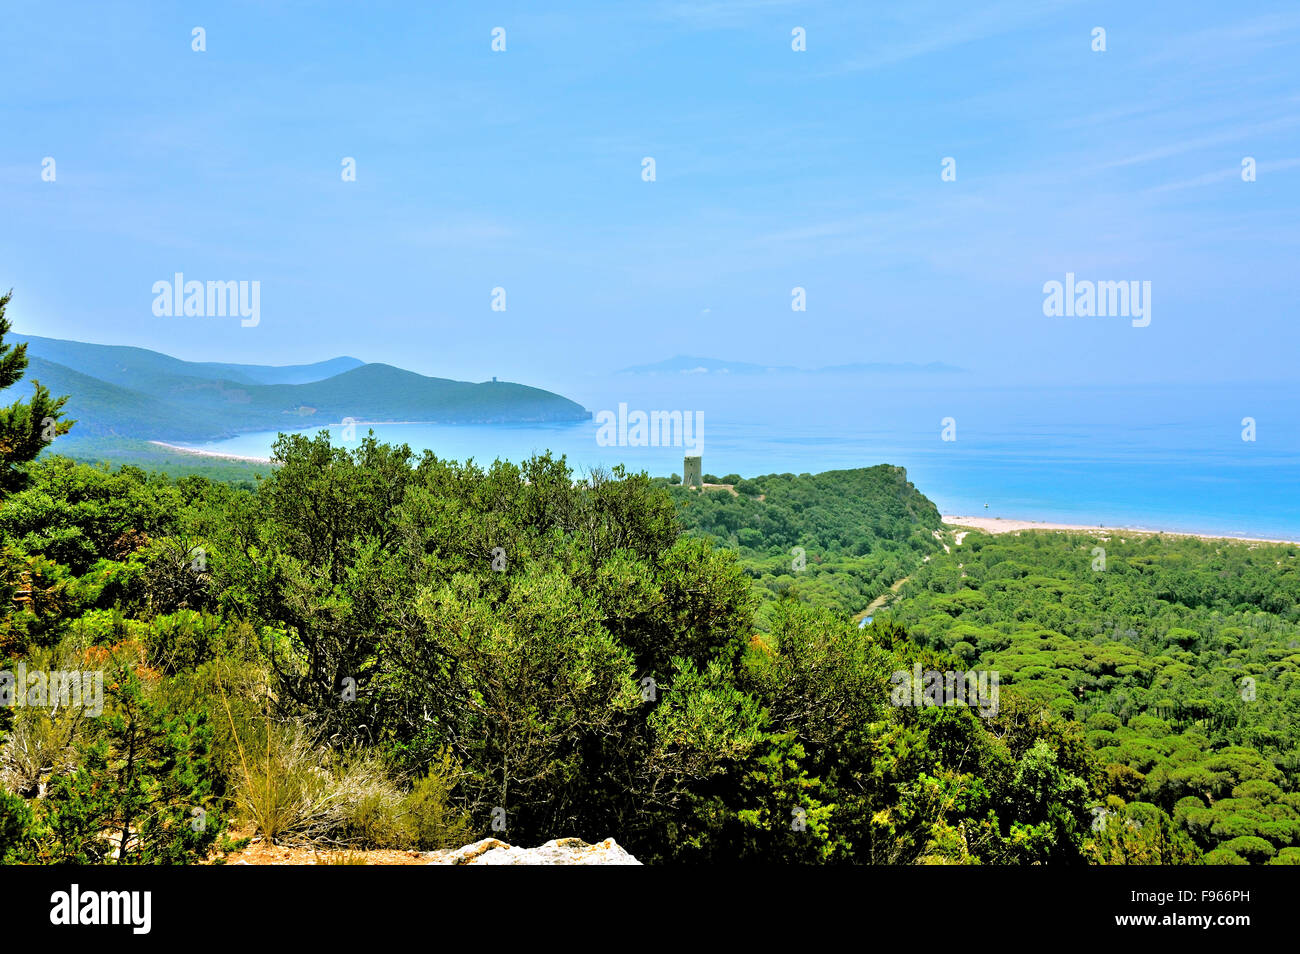 Typical landscape of Maremma with watch towers, Southern Tuscany, ancient farming land, conquered back by nature, Italy Stock Photo